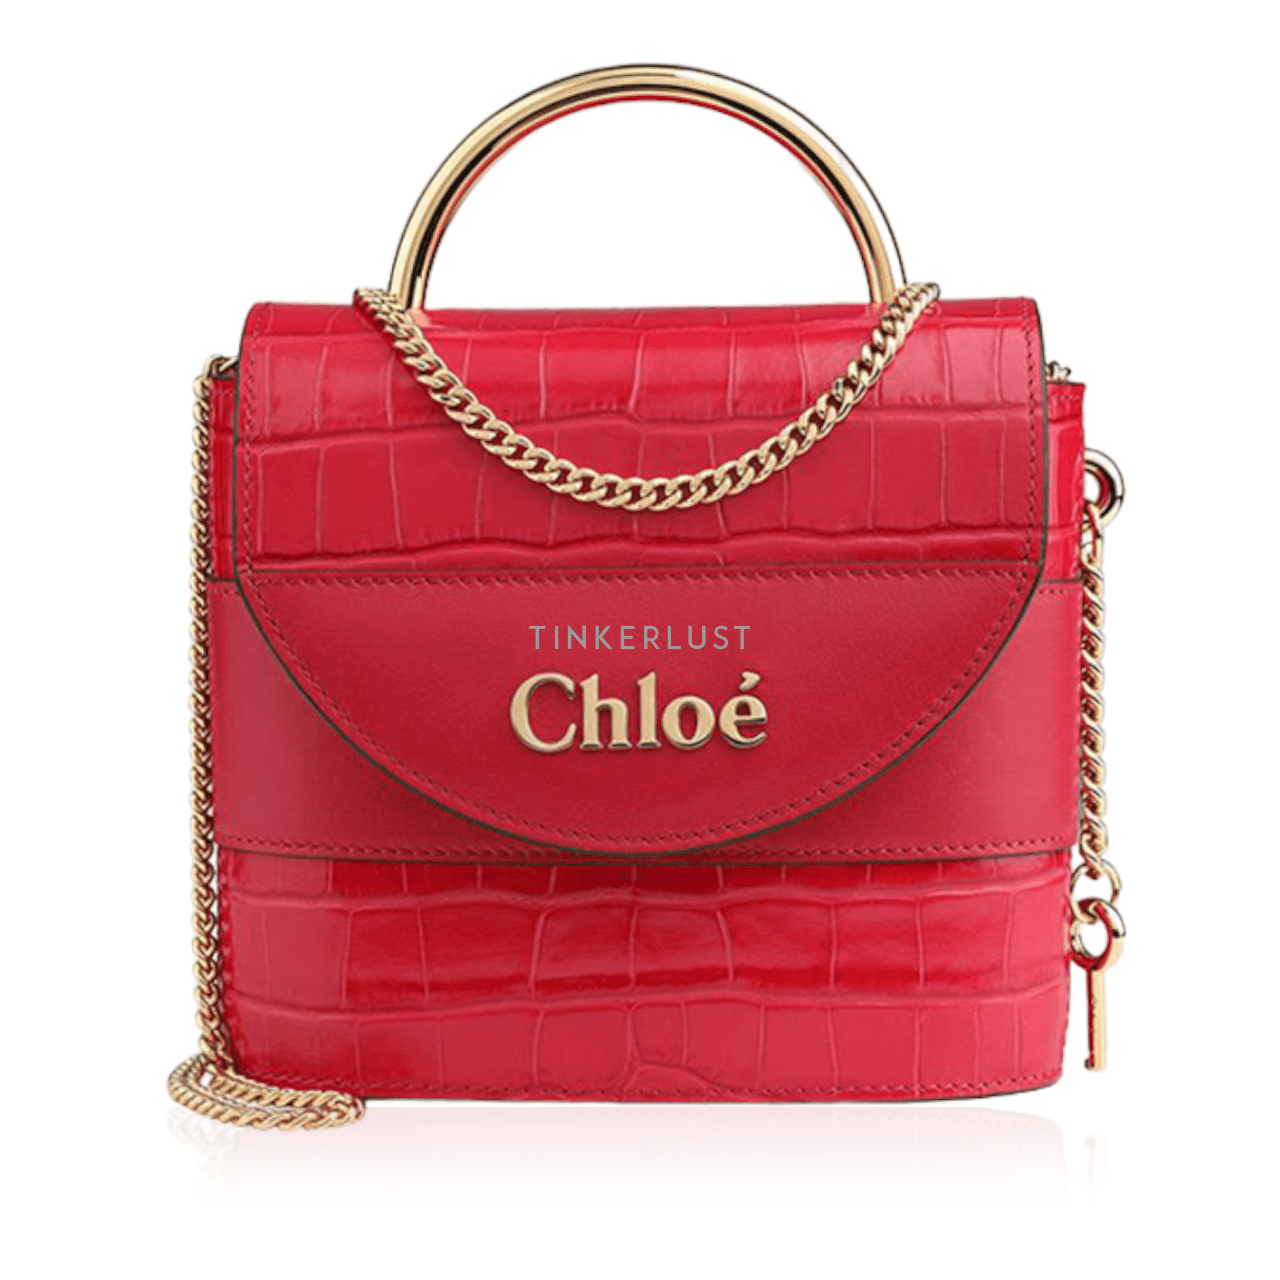 Chloe Small Abylock Top Handle Bag in Crimson Pink Croco Leather with Chain Strap Satchel